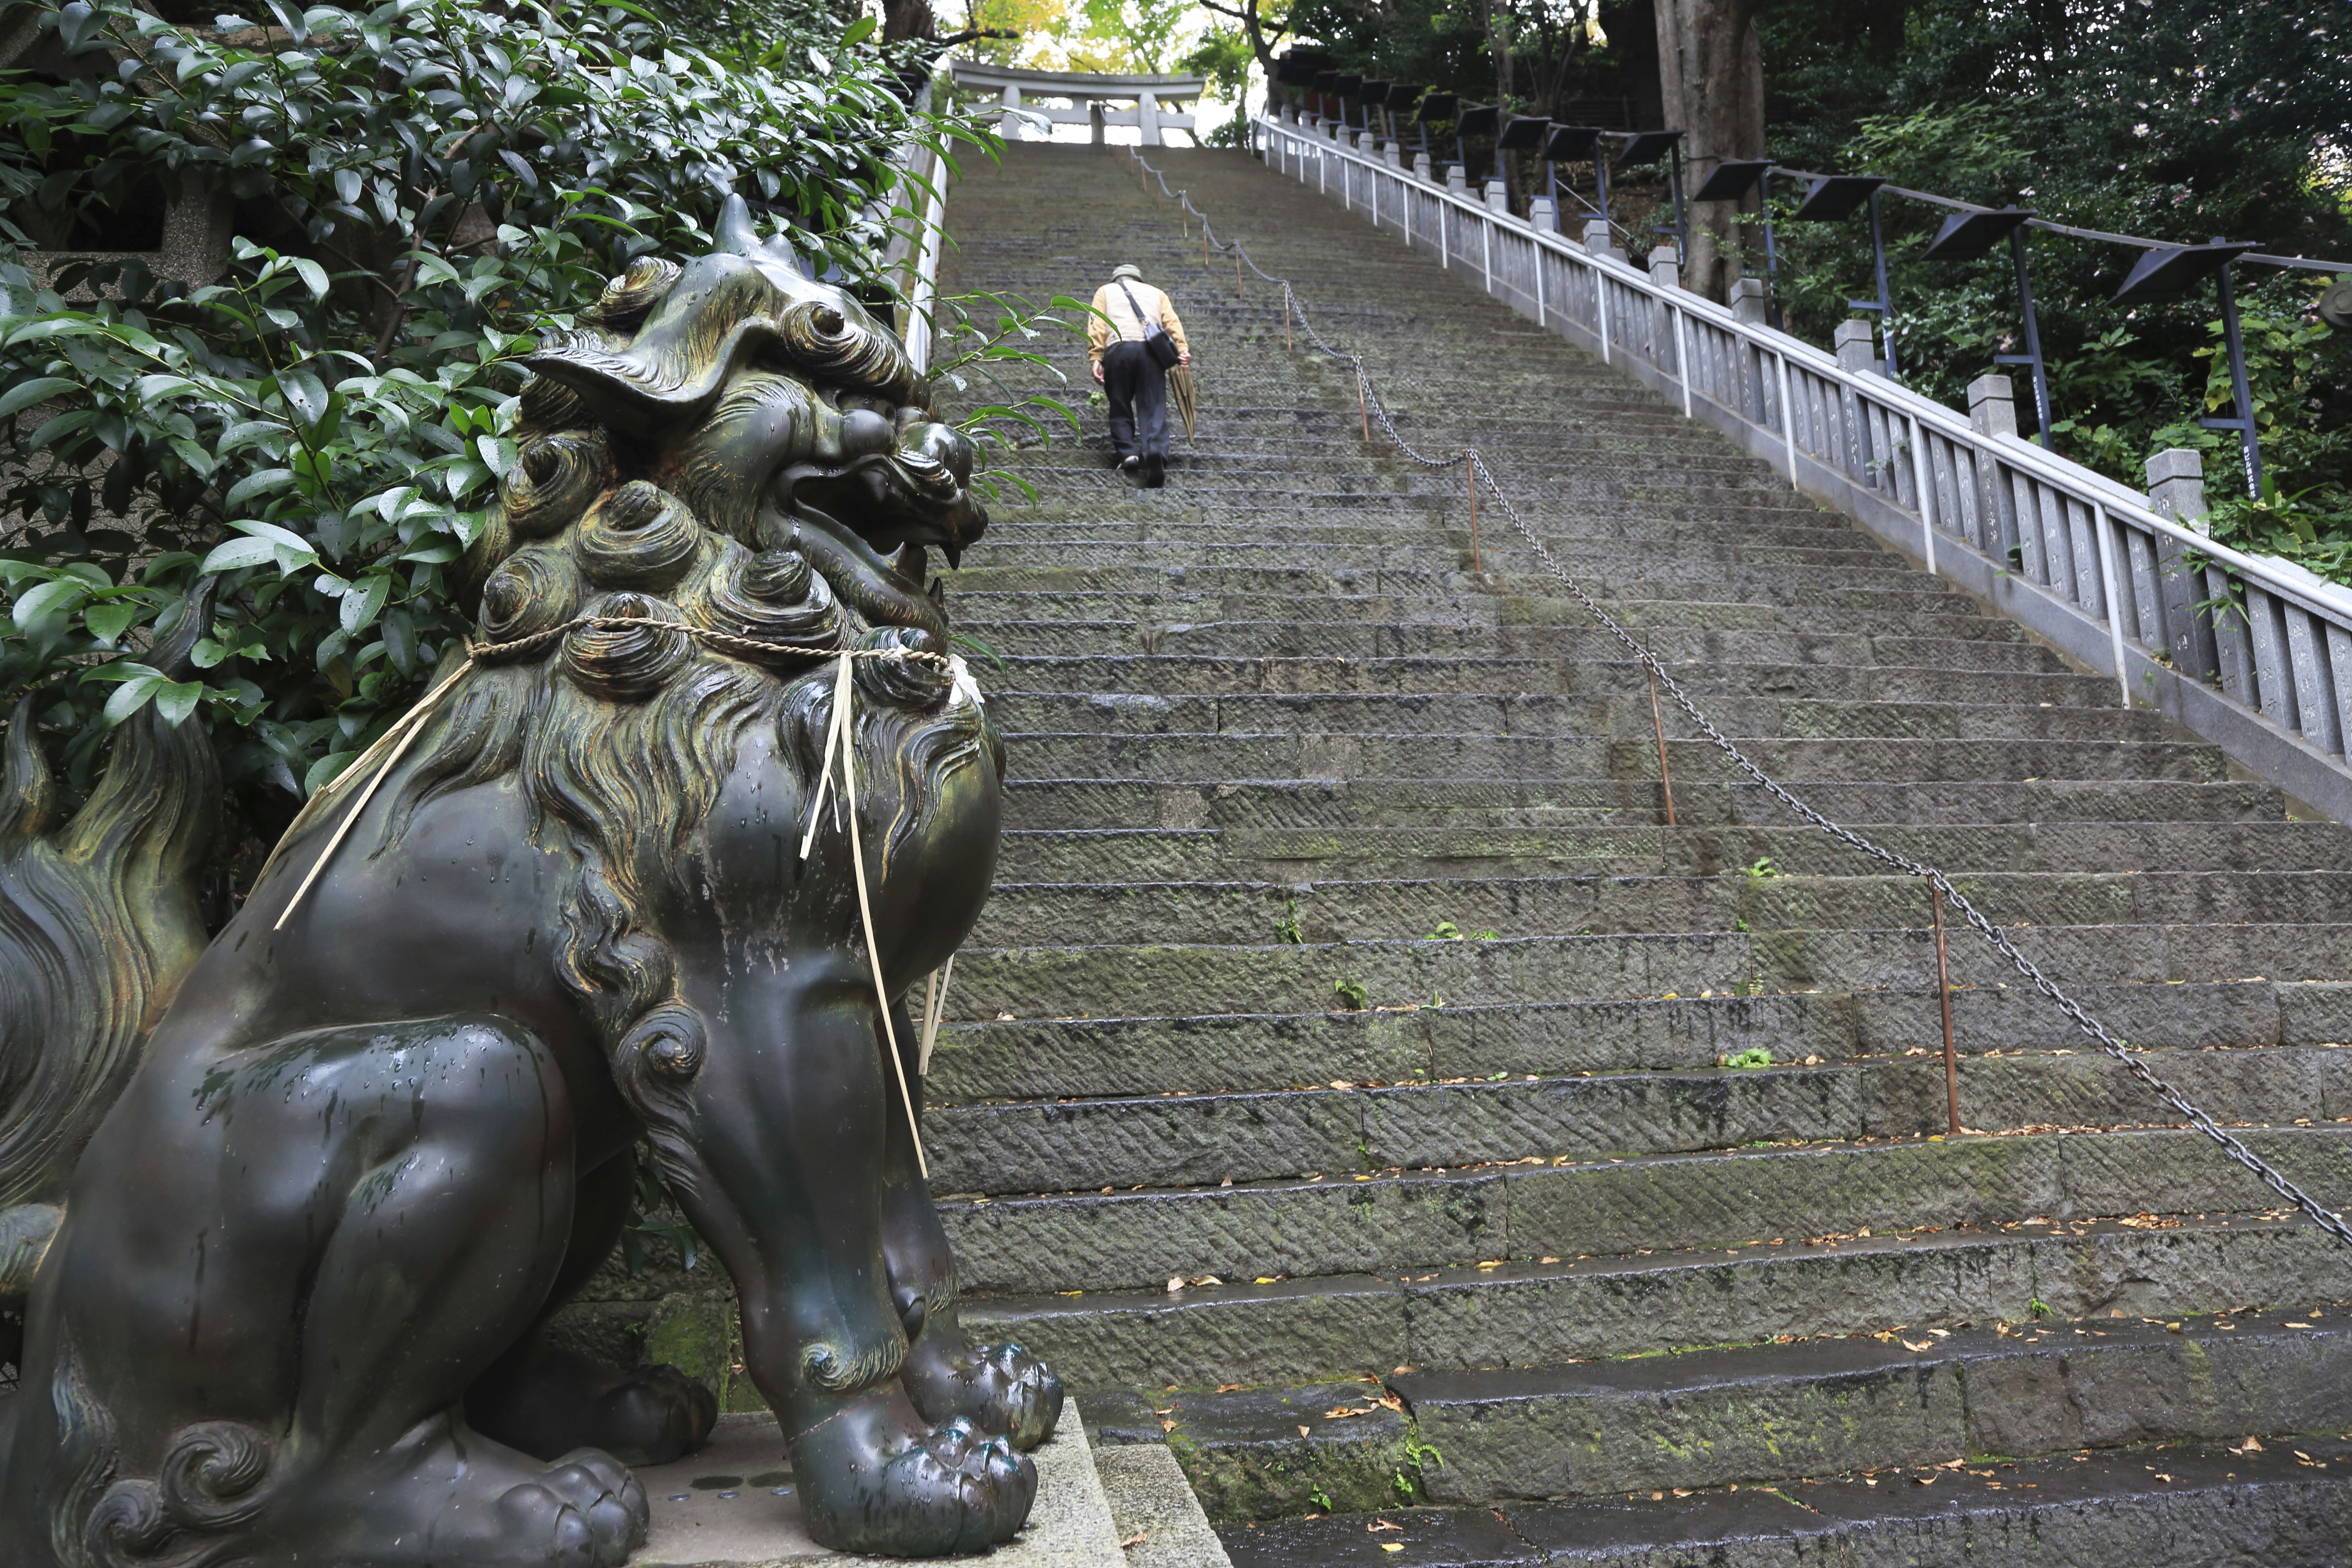 A man climbs a long set of concrete steps stretching upwards. At the top is the gateway to Atago Shrine, near Kyoto